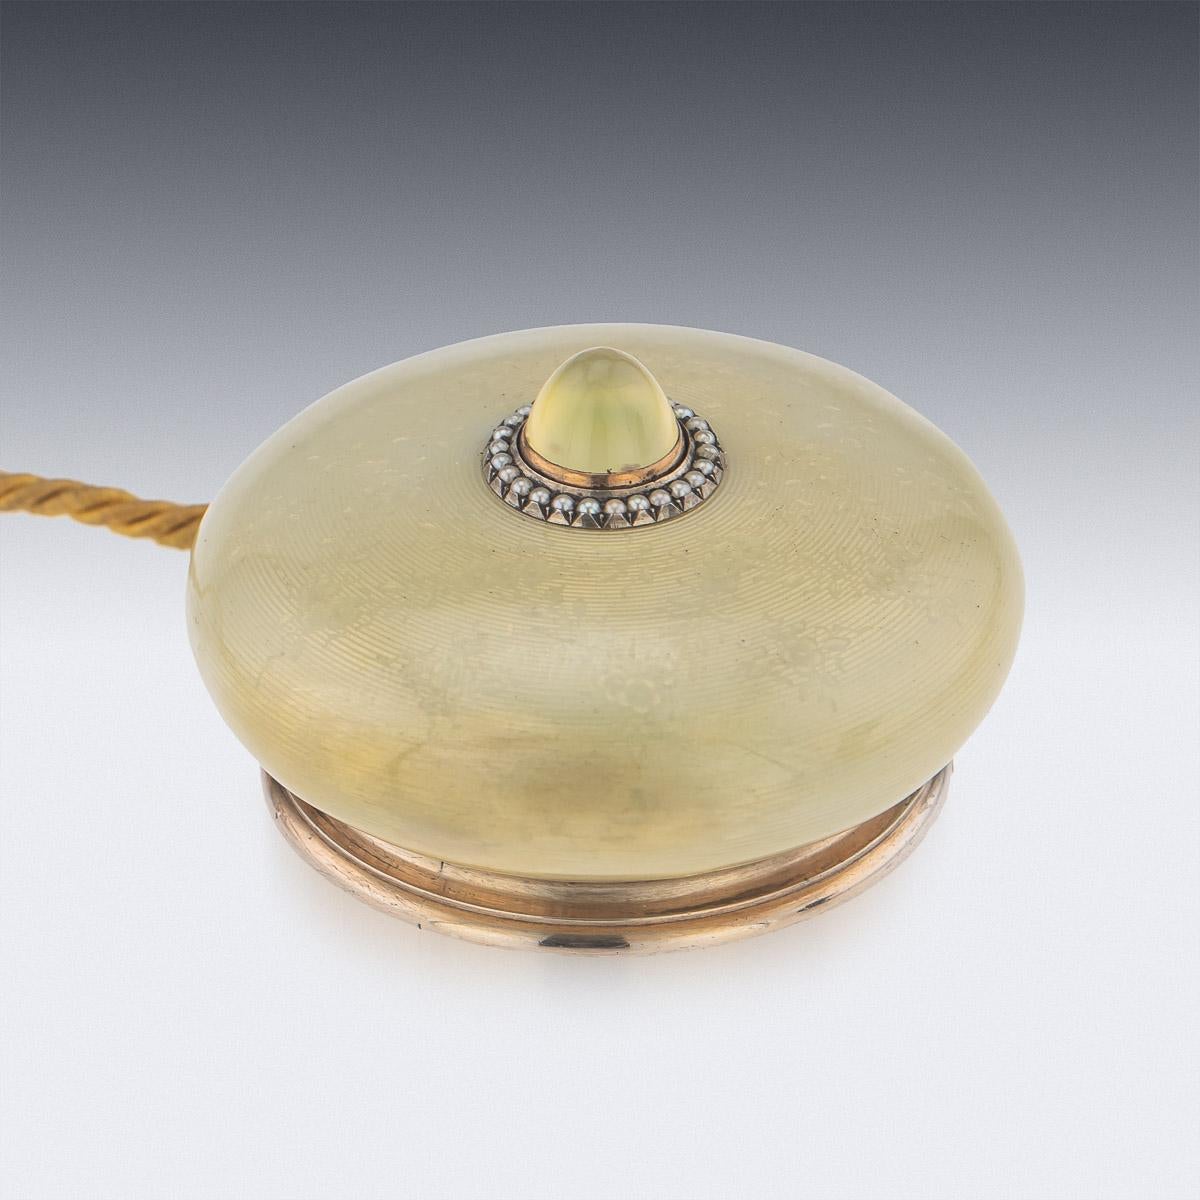 Antique early-20th Century Imperial Russian solid silver-gilt & guilloche enamel bell-push, of circular cushion form, the surface enamelled in translucent golden / white over concentric reeded engine-turning and an engraved floral motifs, the button